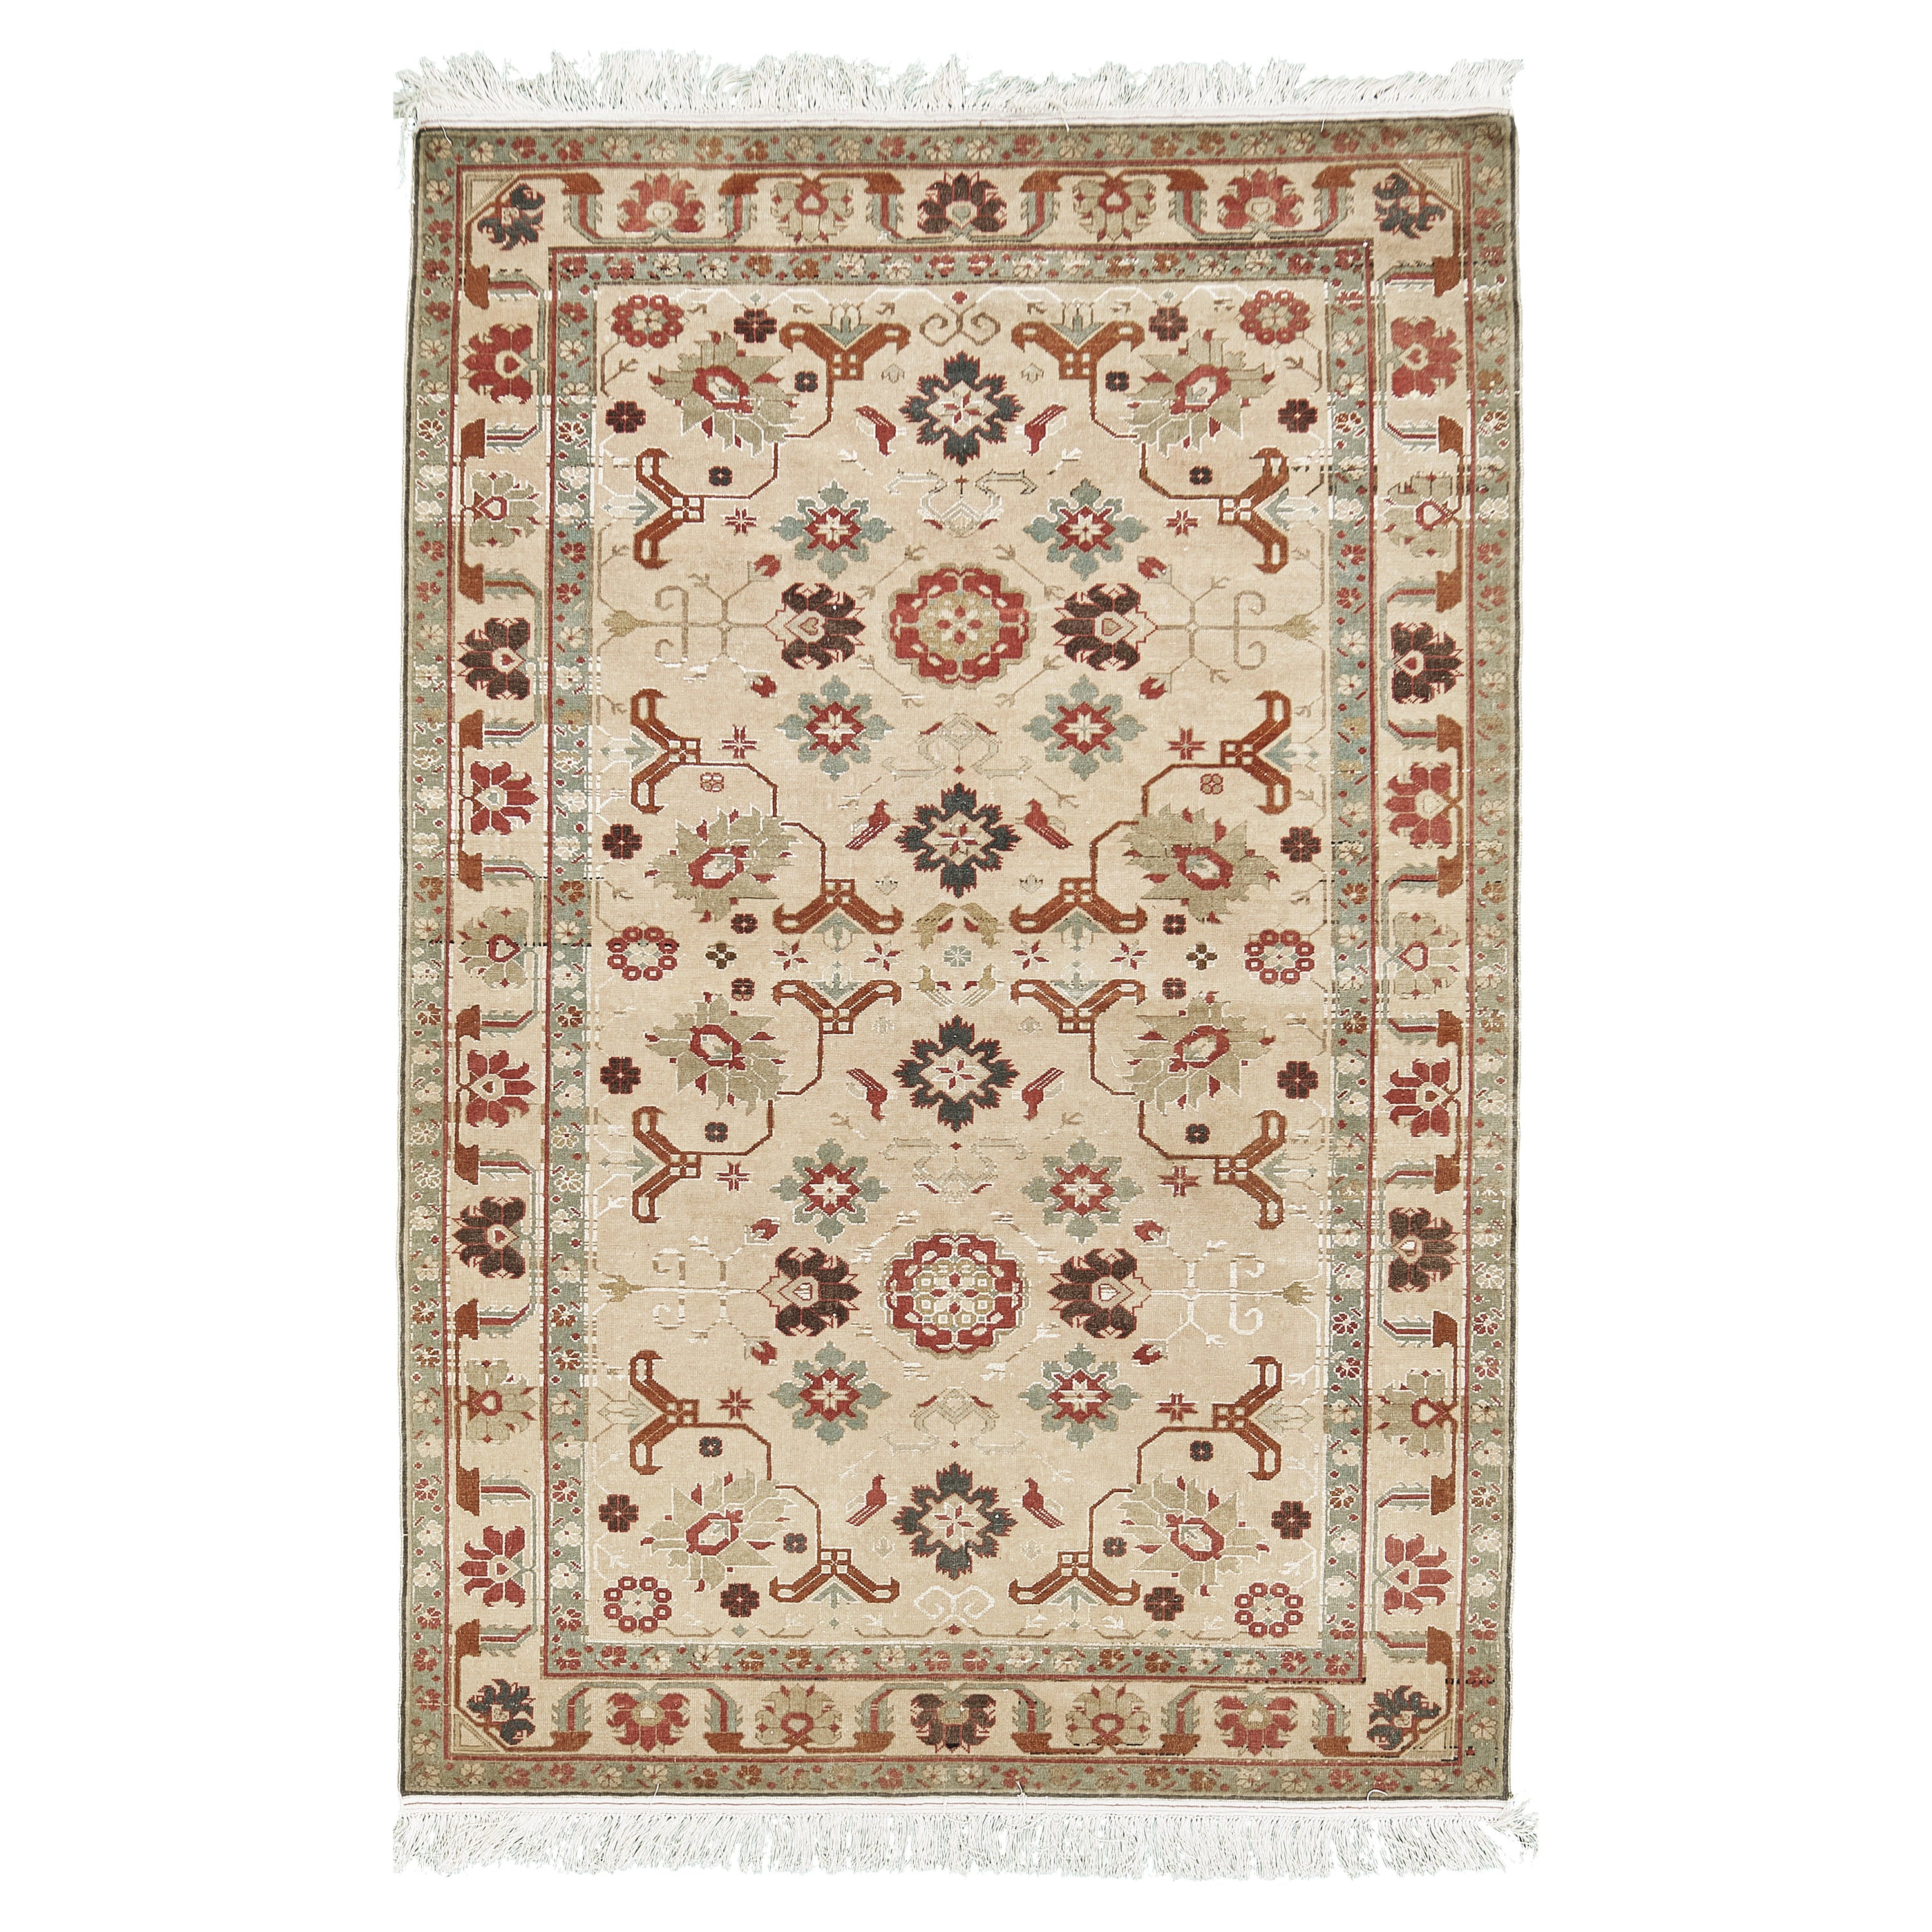 Egyptian Moroccan and North African Rugs